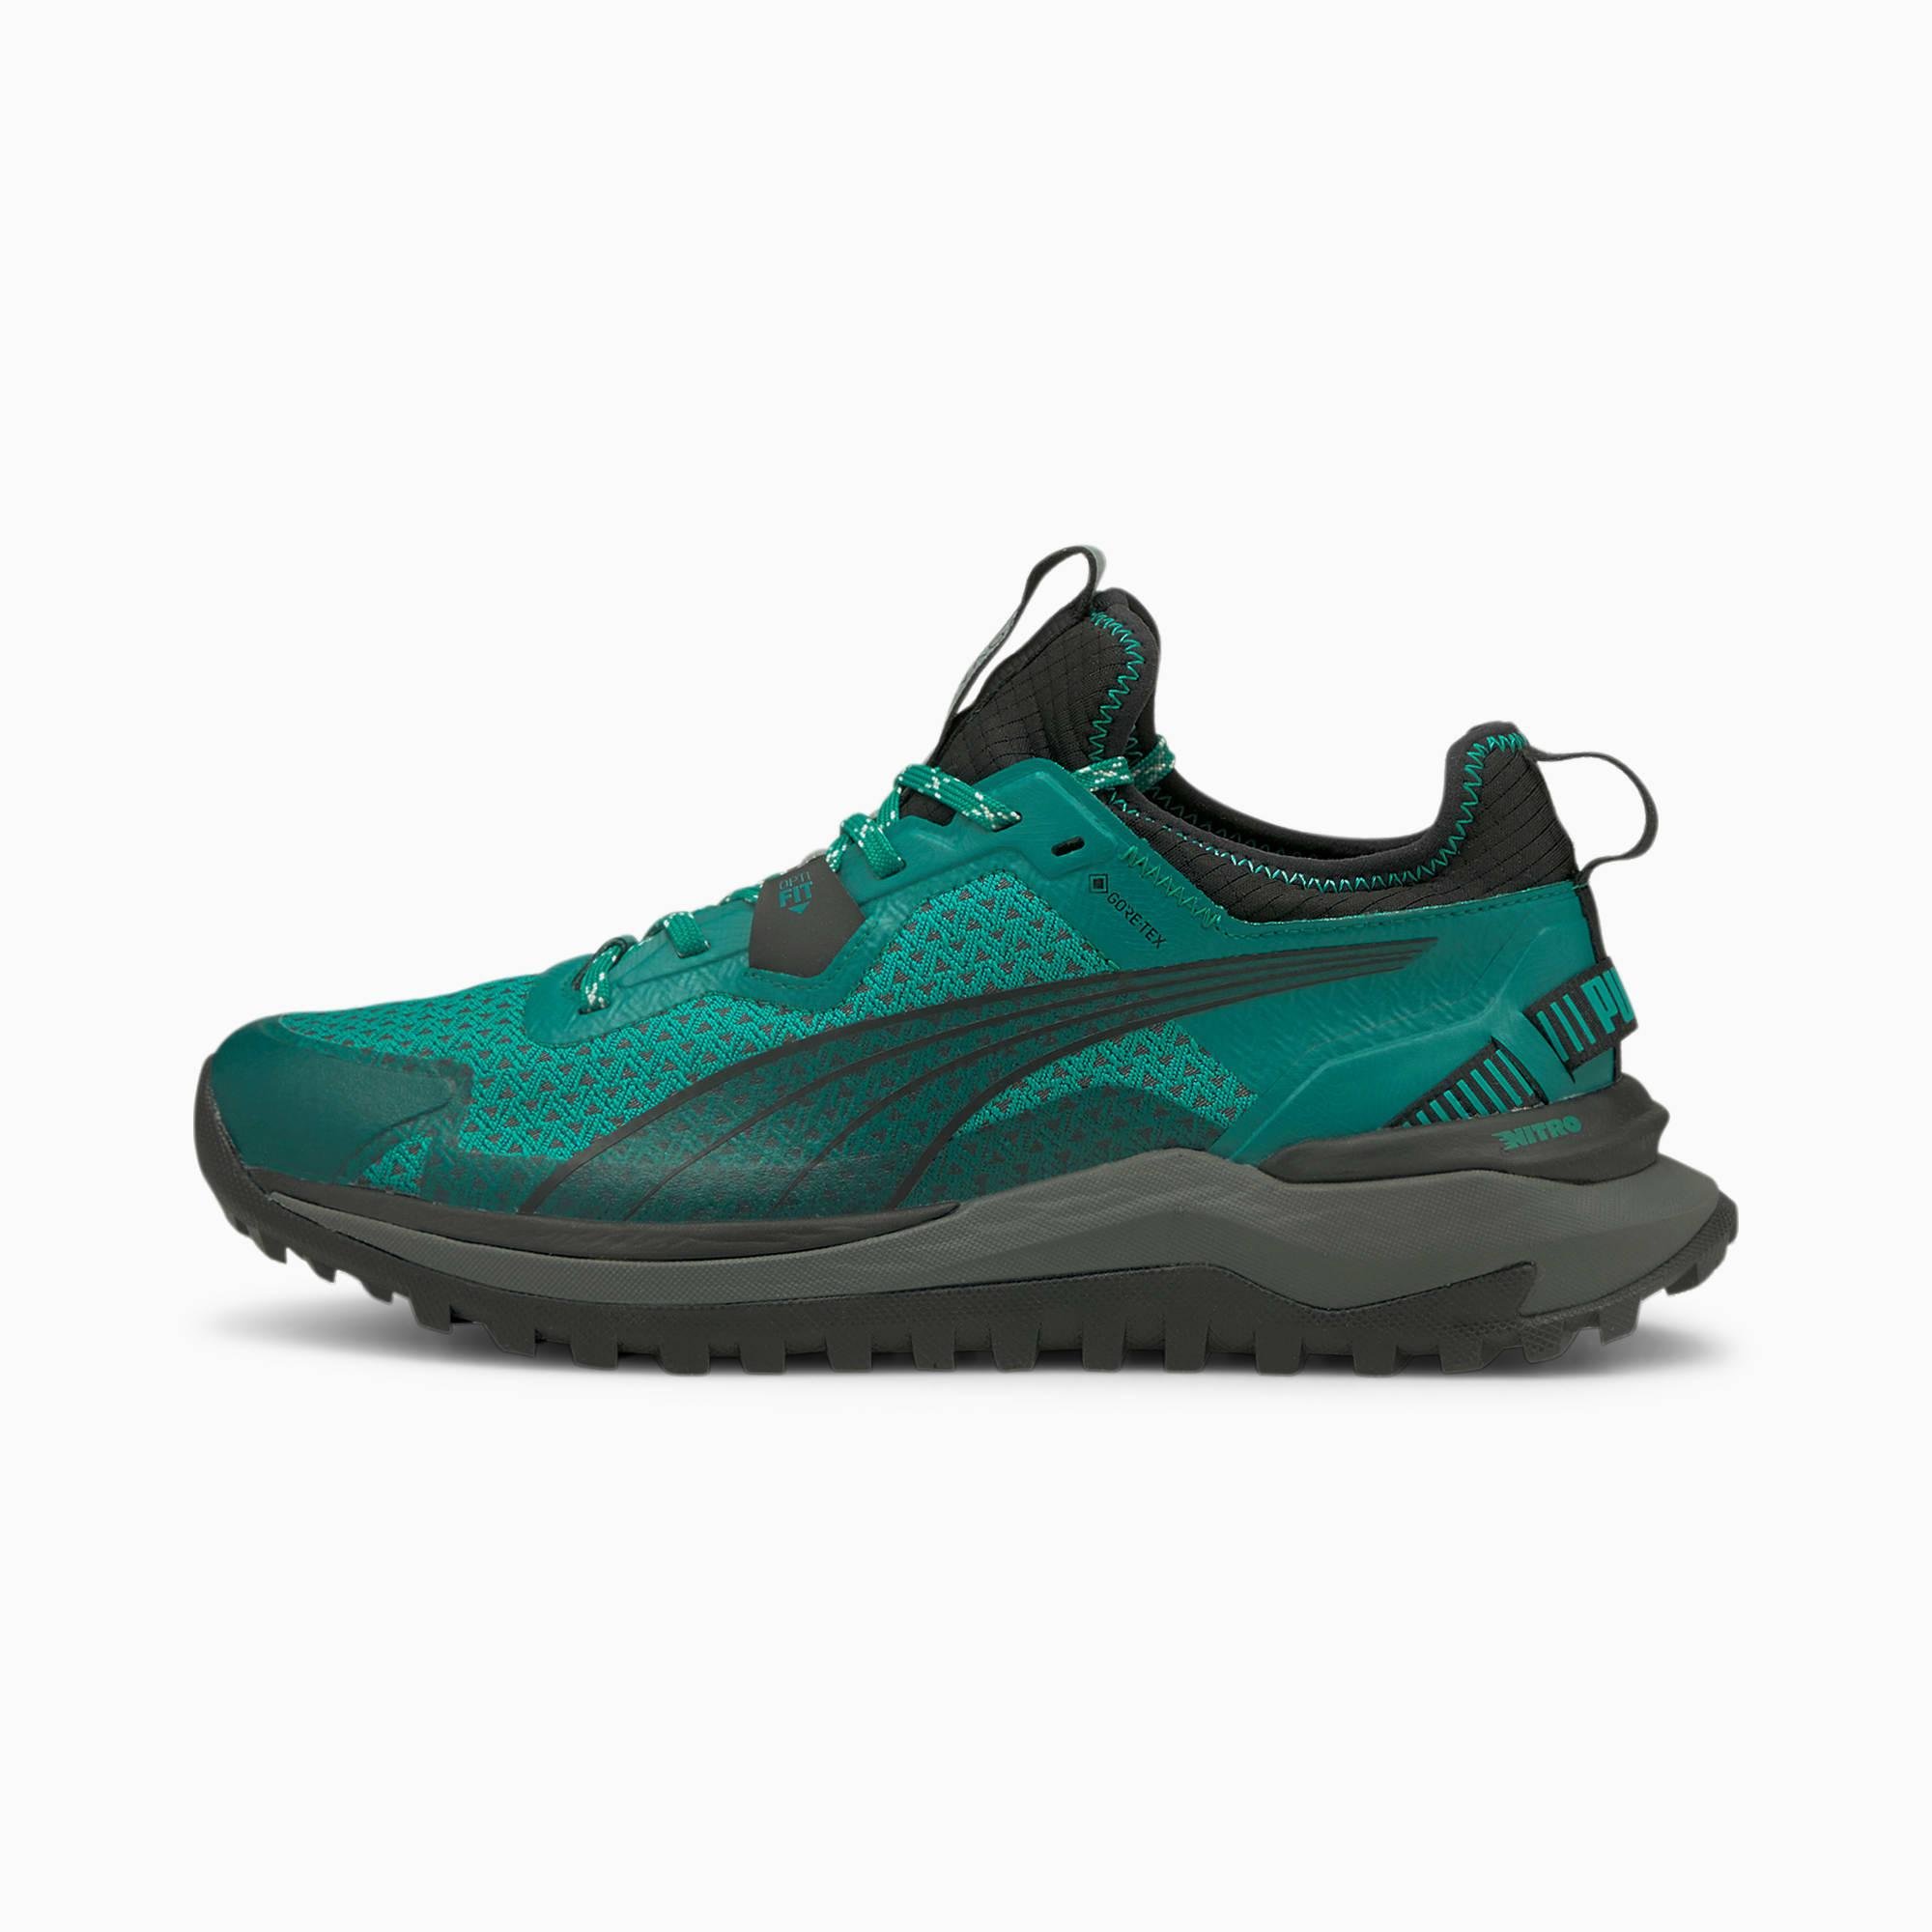 Voyage Nitro Gore-Tex Men's Running Shoes by PUMA | jellibeans